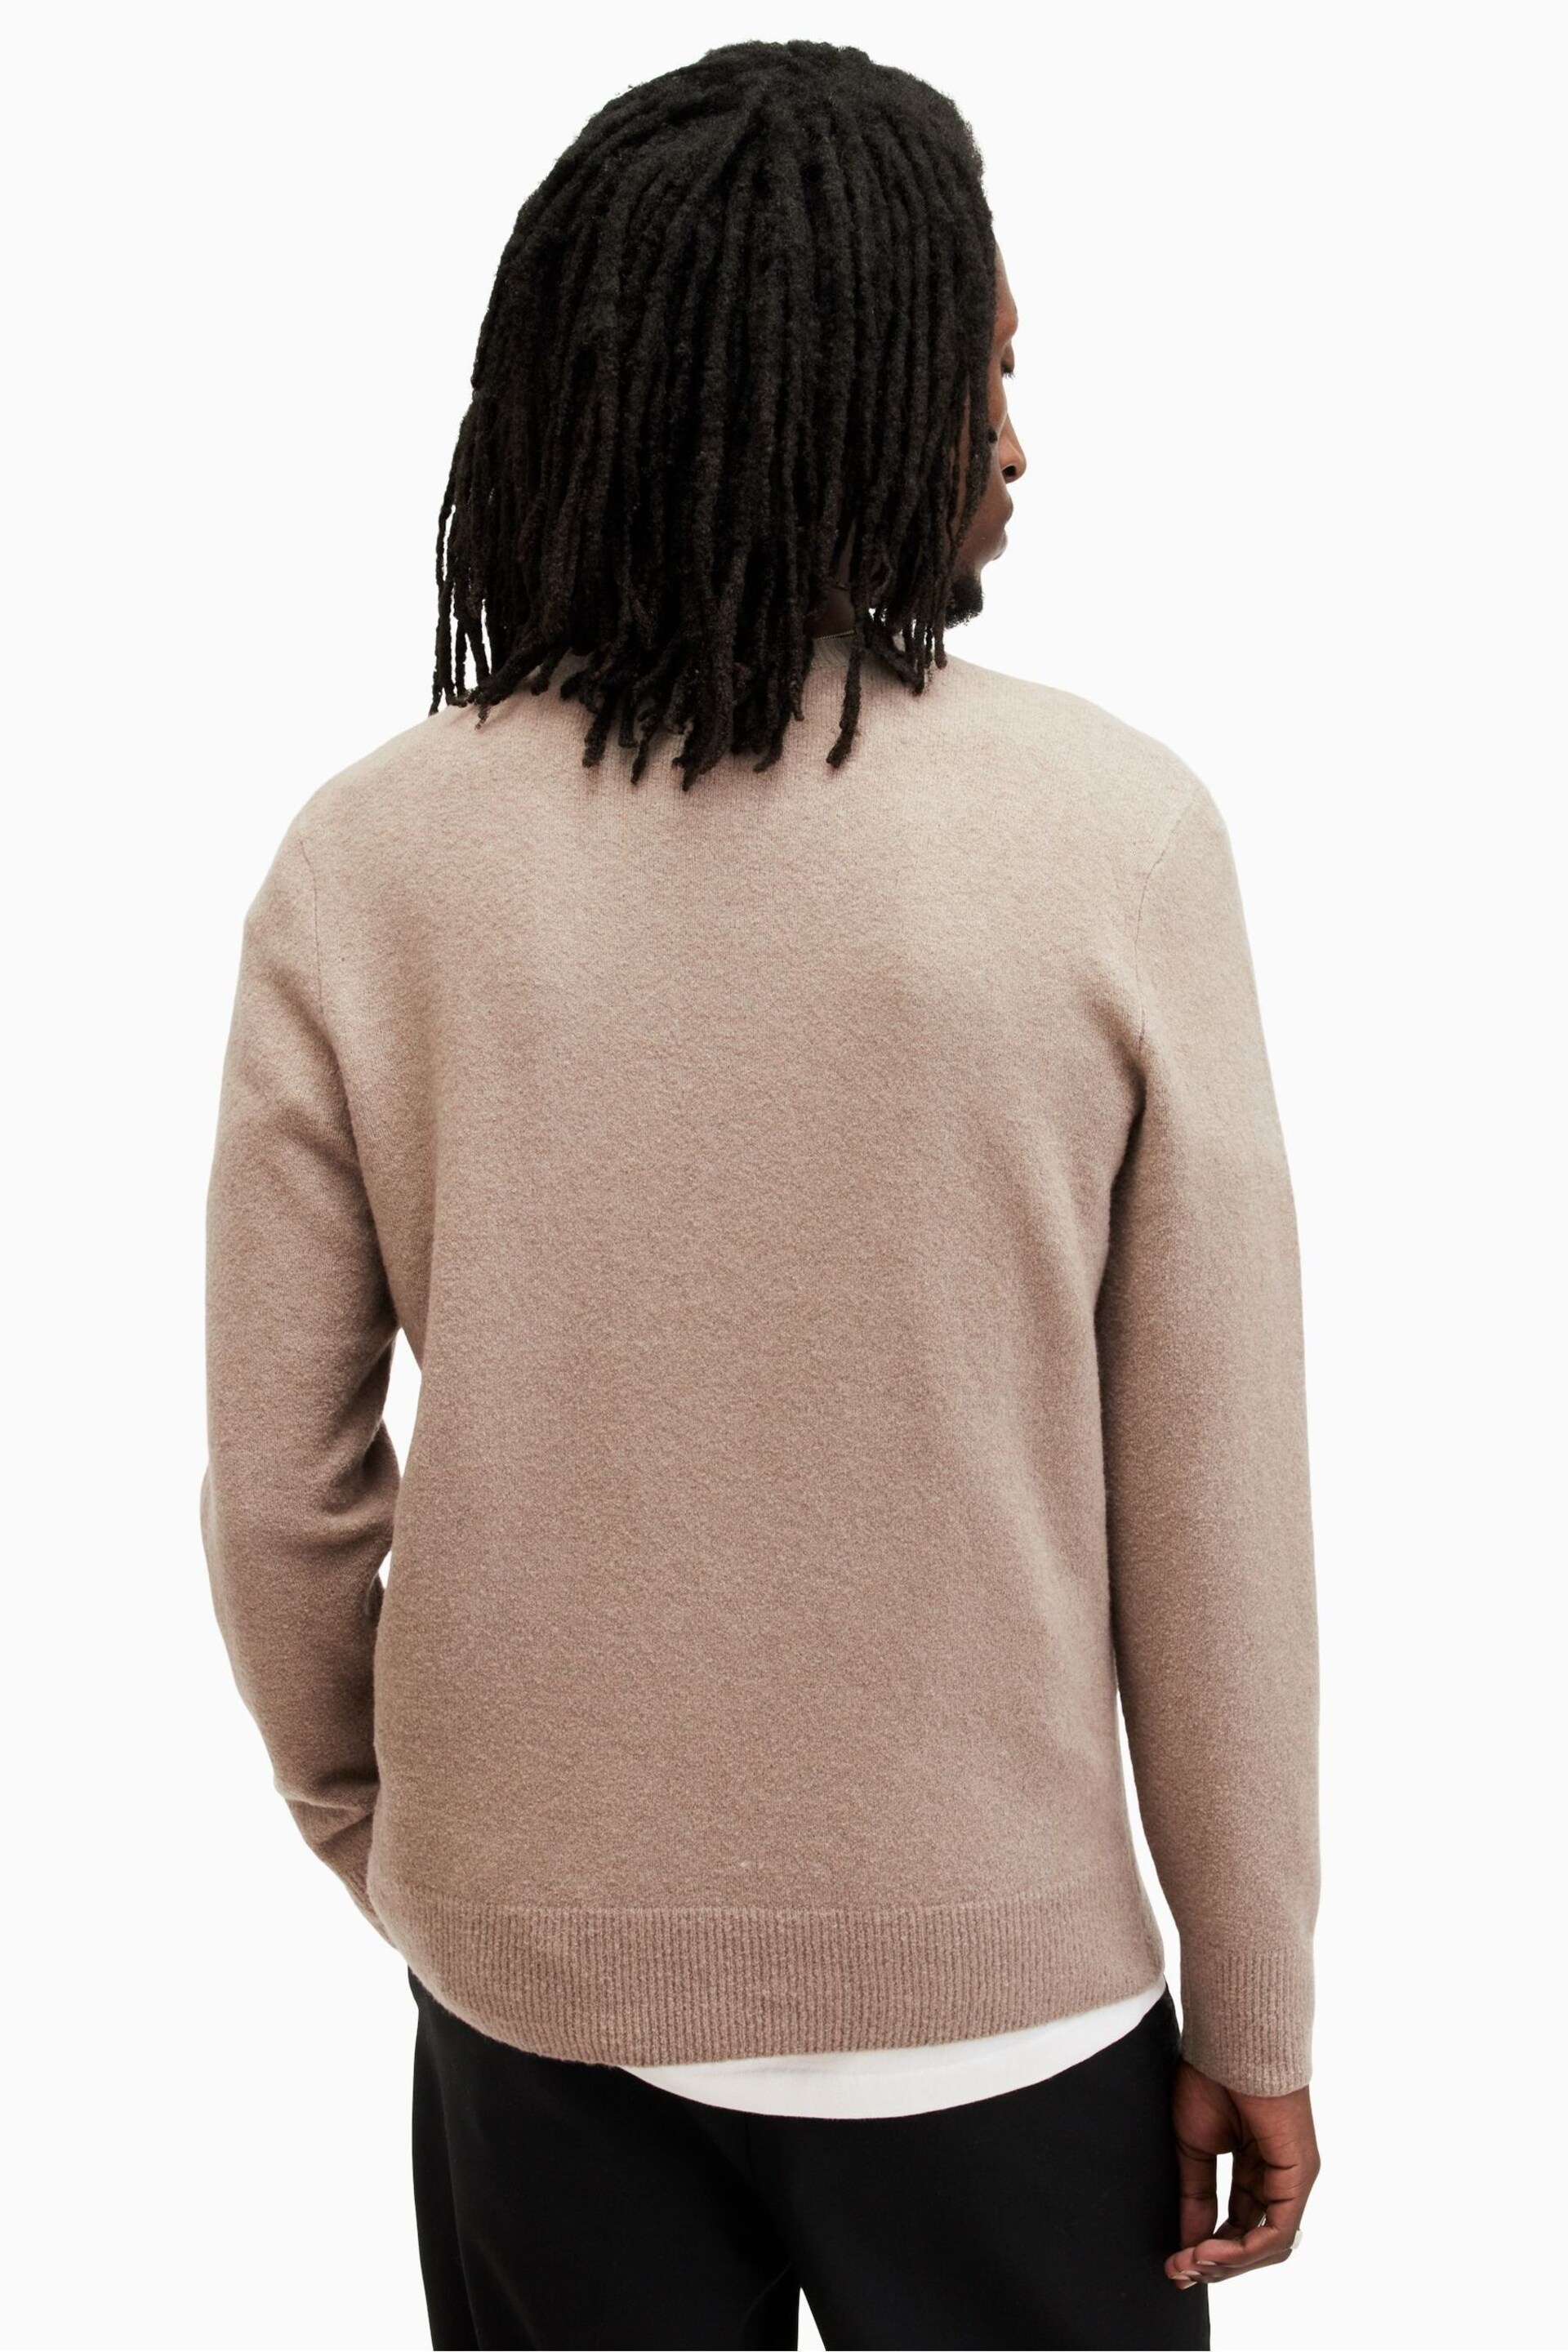 AllSaints Natural Lobke Knit Crew Sweater - Image 2 of 4